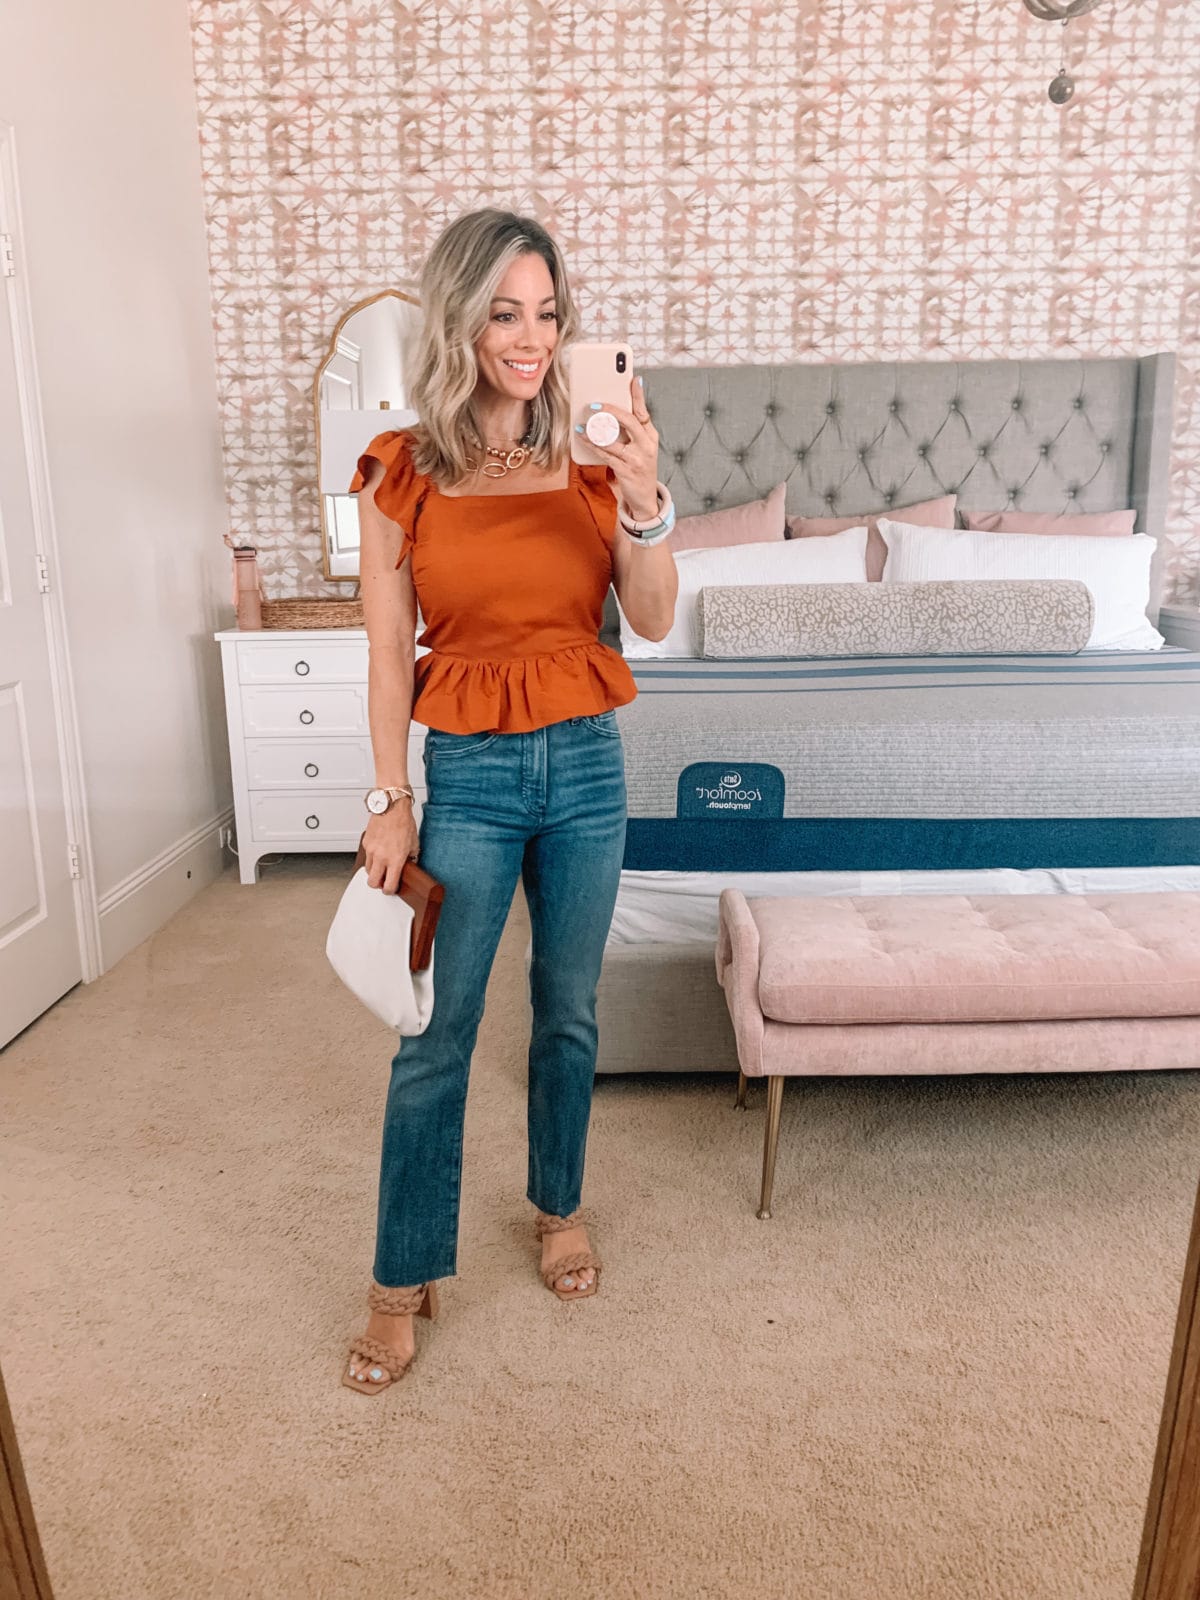 Dressing Room Finds, Express, Ruffle Sleeve Top, Jeans, Sandals, Clutch 